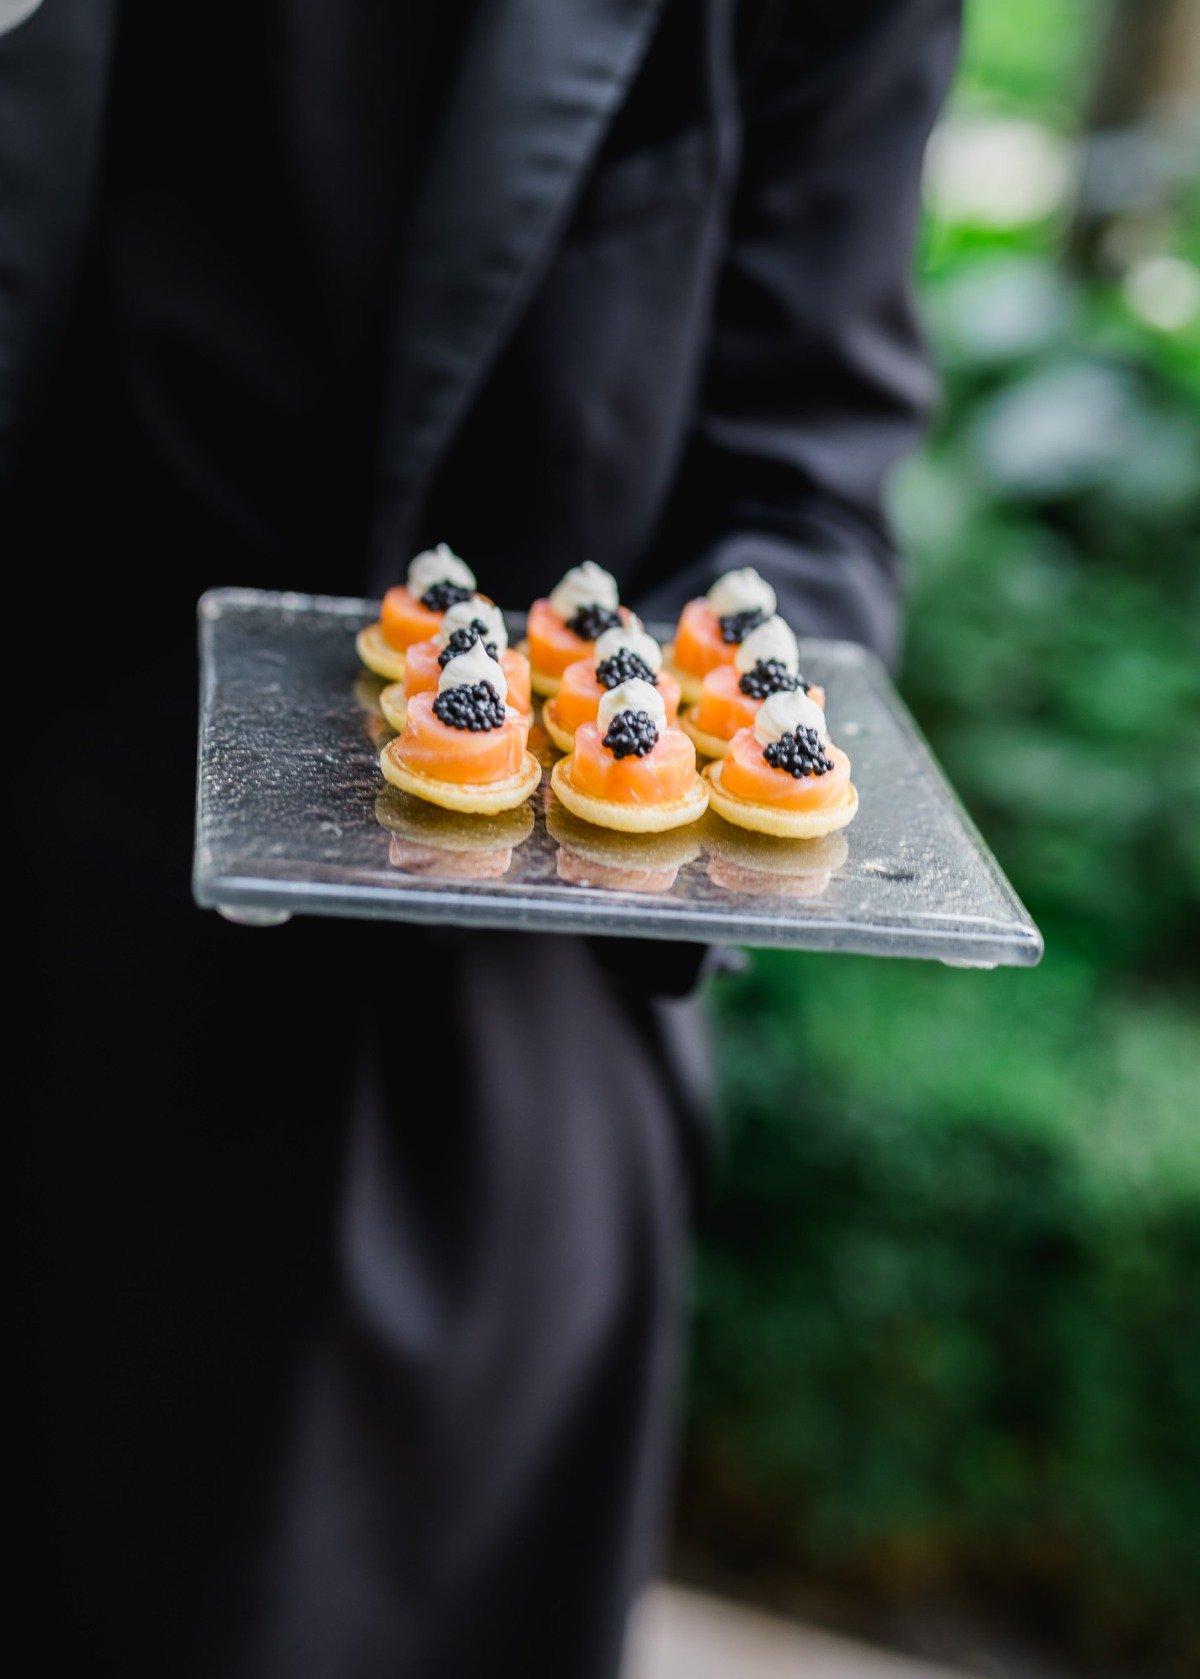 Hors d'oeuvres served at wedding